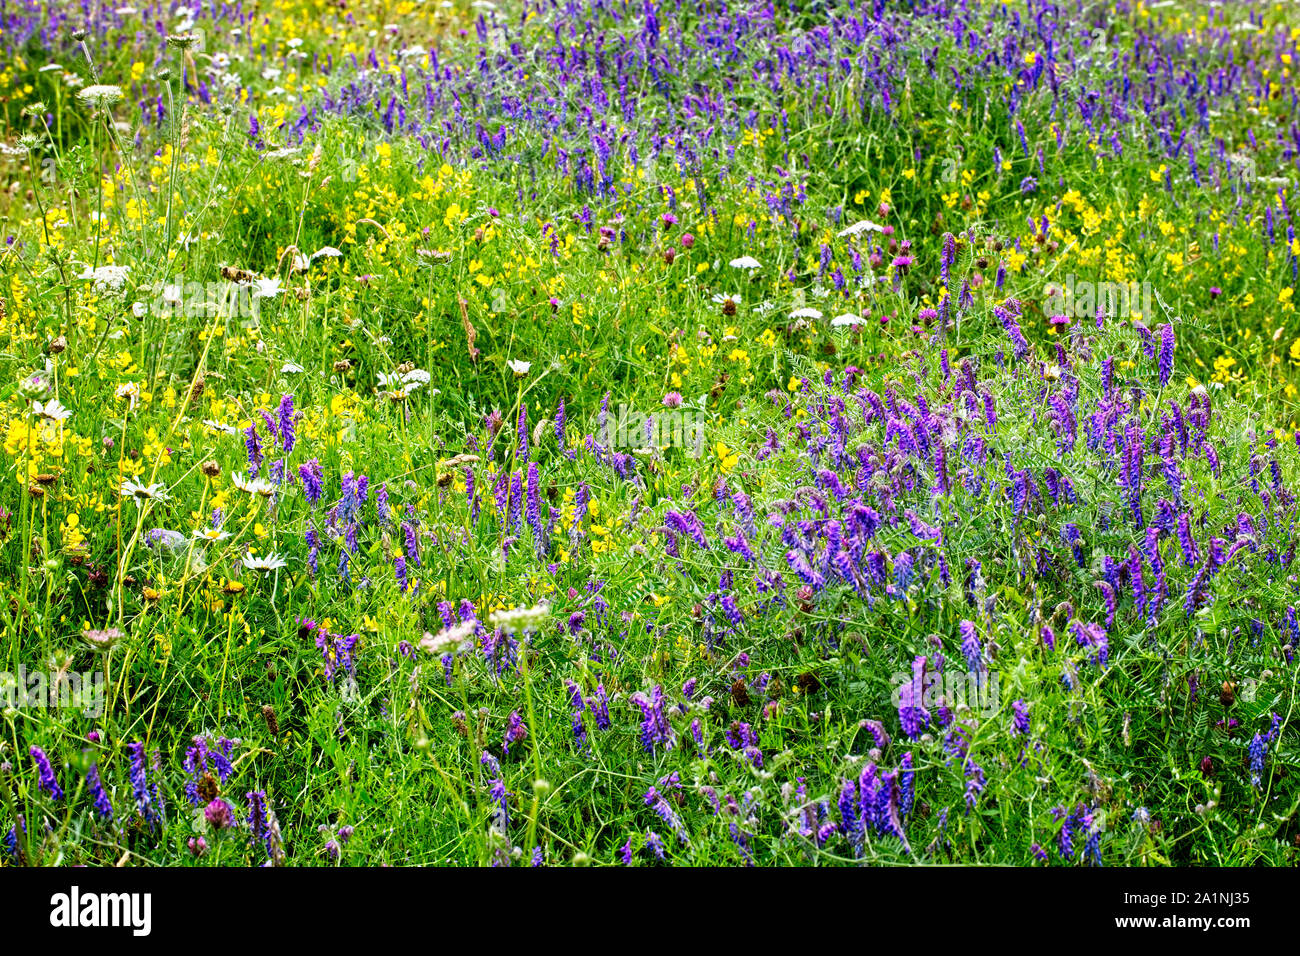 Wild flower meadow with Knapweeds, Trefoils, Vetches and Yarrow, Rutland Water, Leicestershire, England, UK. Stock Photo